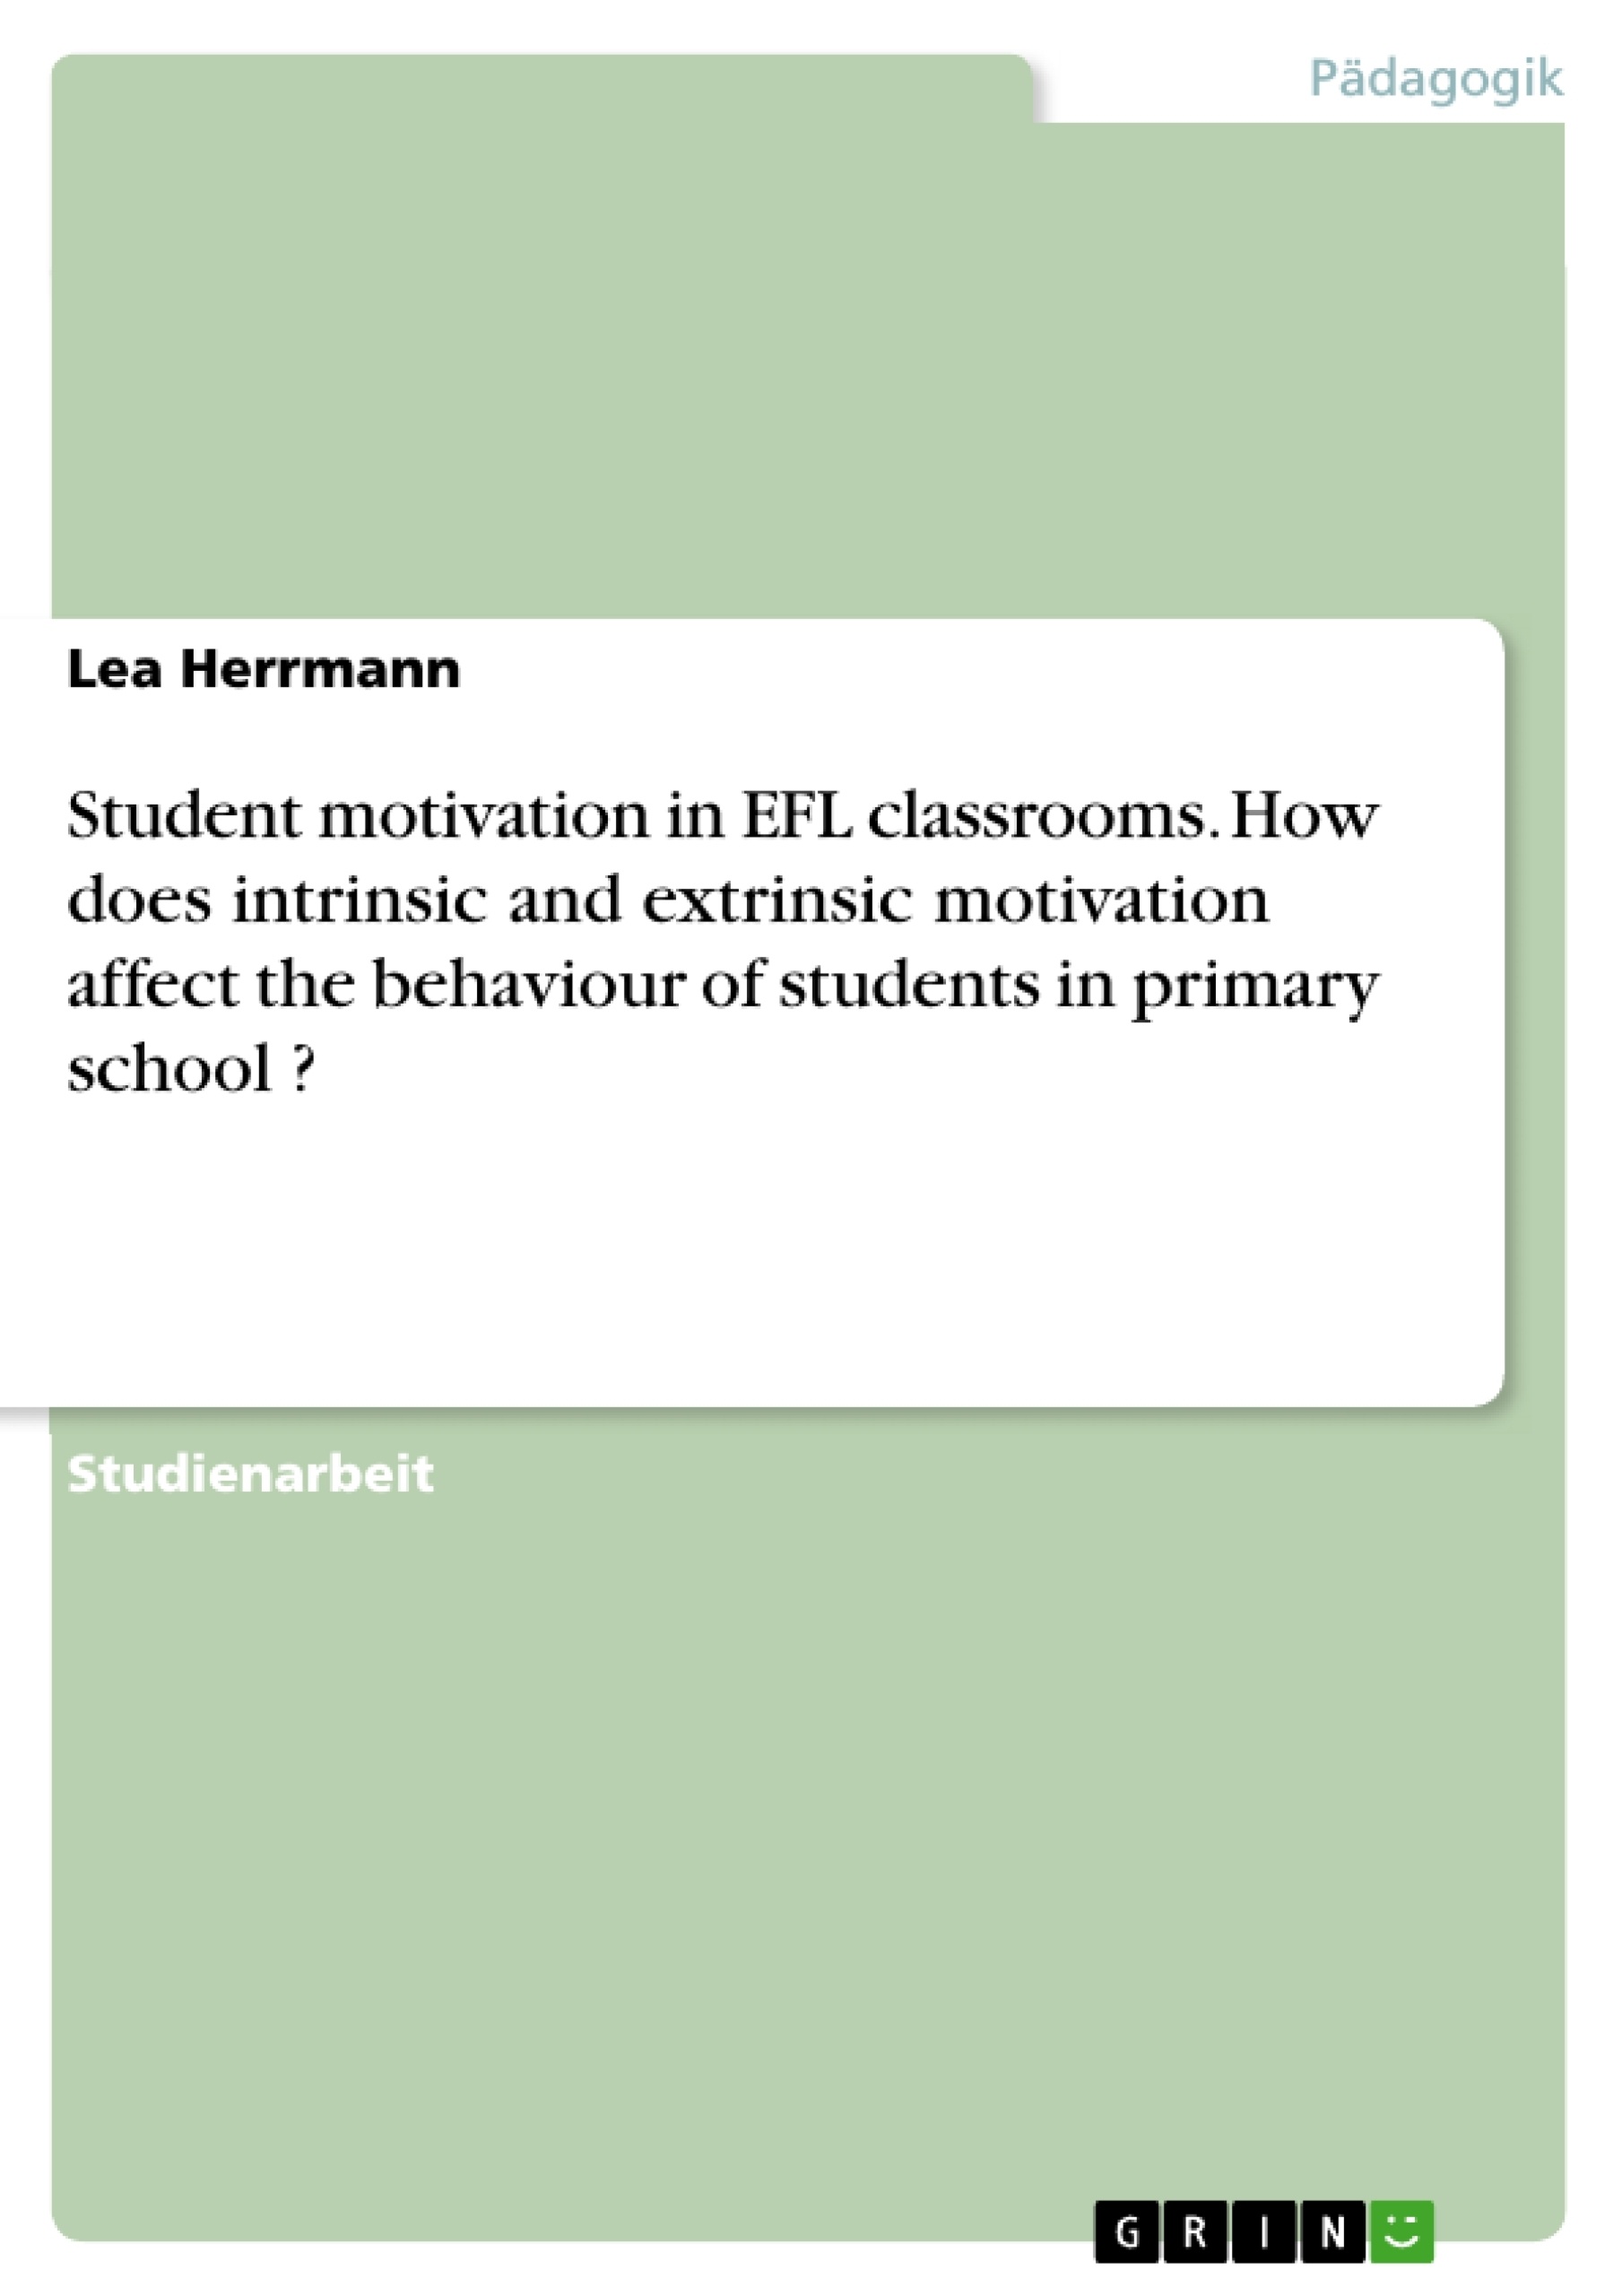 Titel: Student motivation in EFL classrooms. How does intrinsic and extrinsic motivation affect the behaviour of students in primary school ?